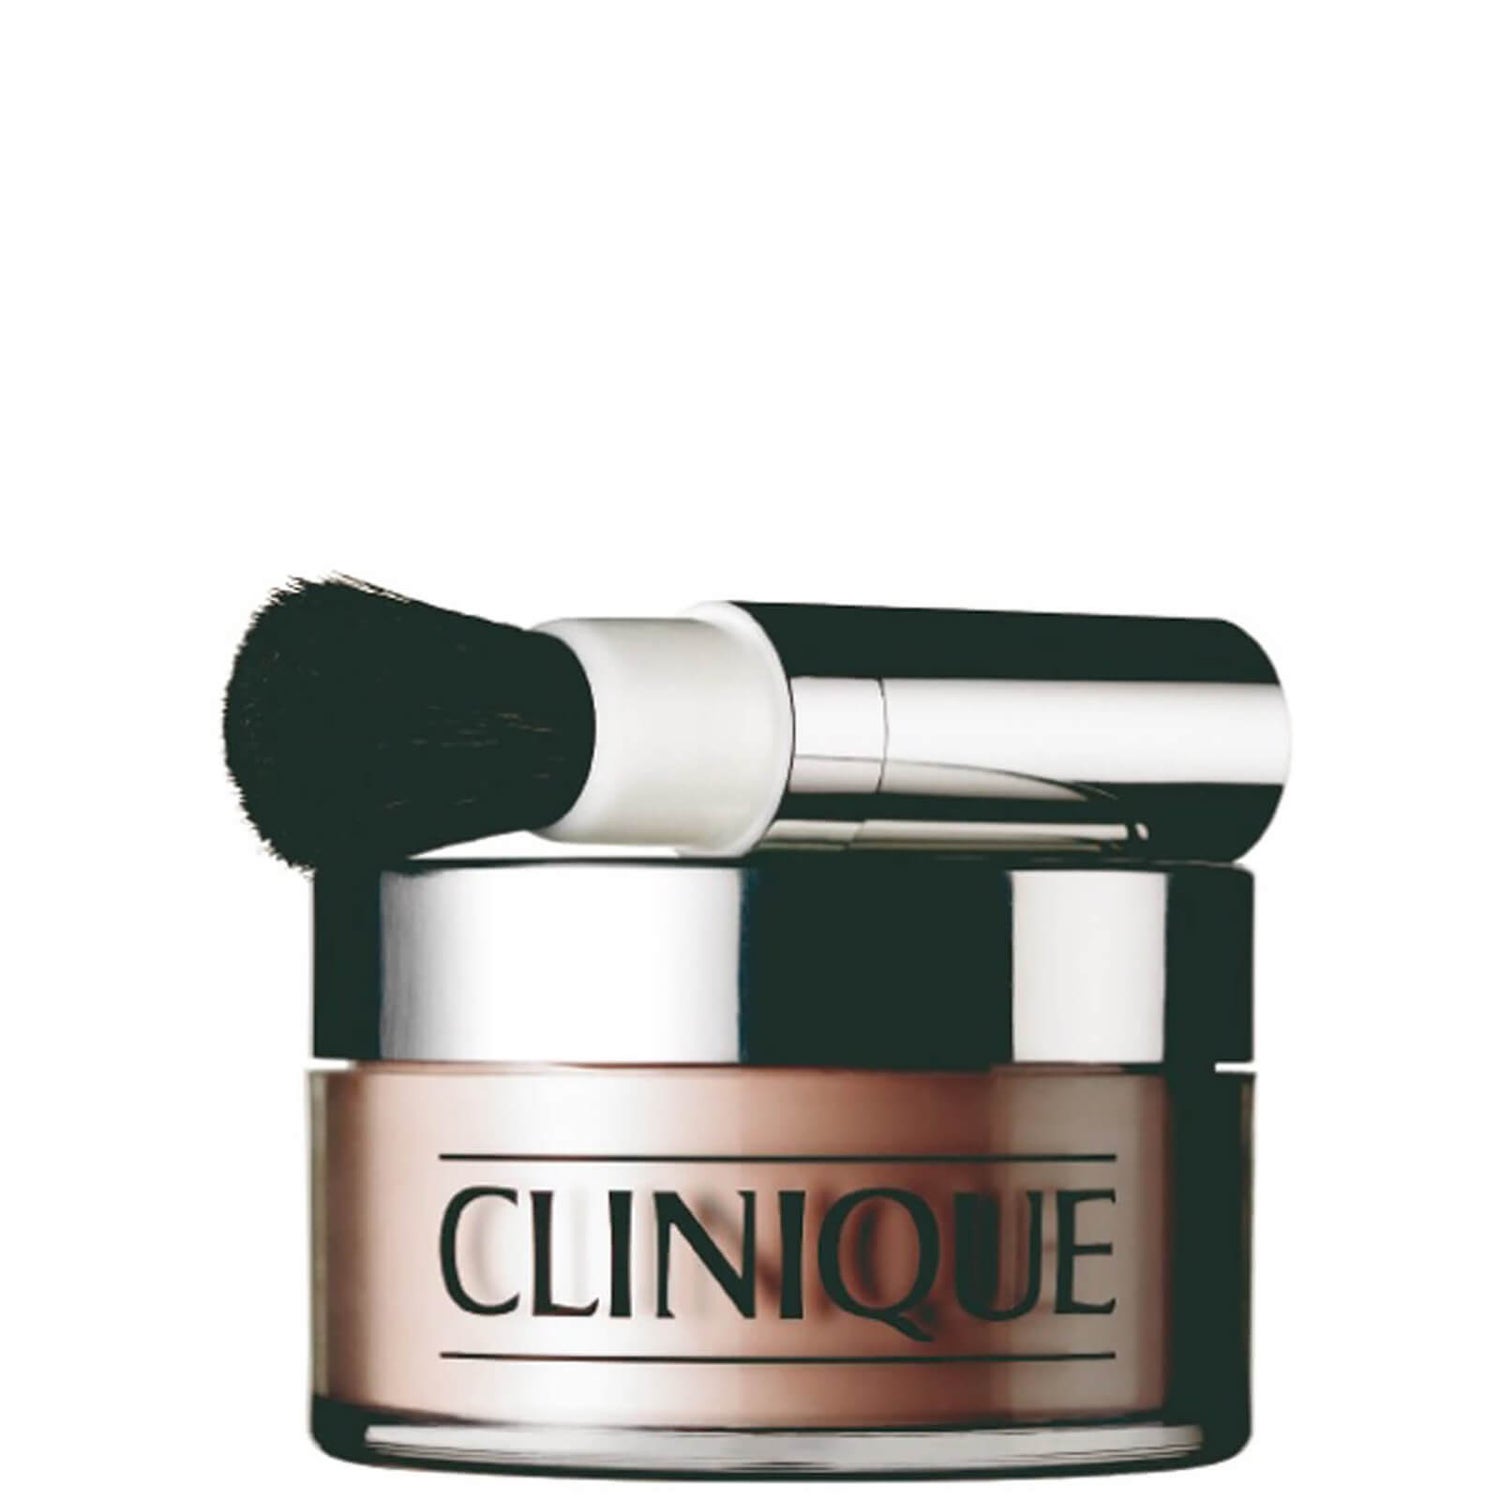 Clinique Blended Face Powder and Brush cipria in polvere con pennello 35 g